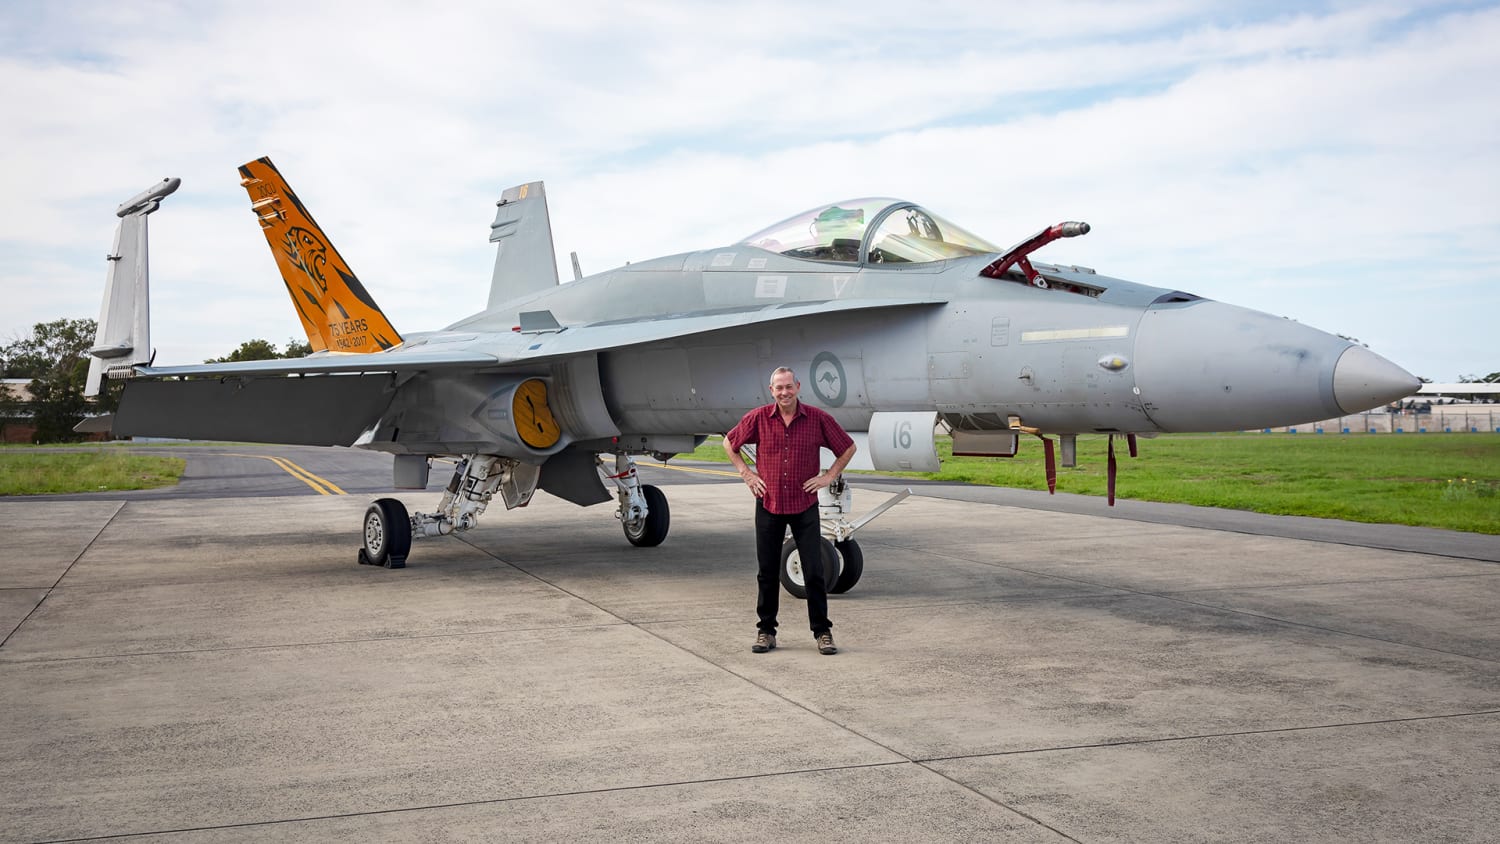 This Man Owns The World's Most Advanced Private Air Force After Buying 46 F/A-18 Hornets